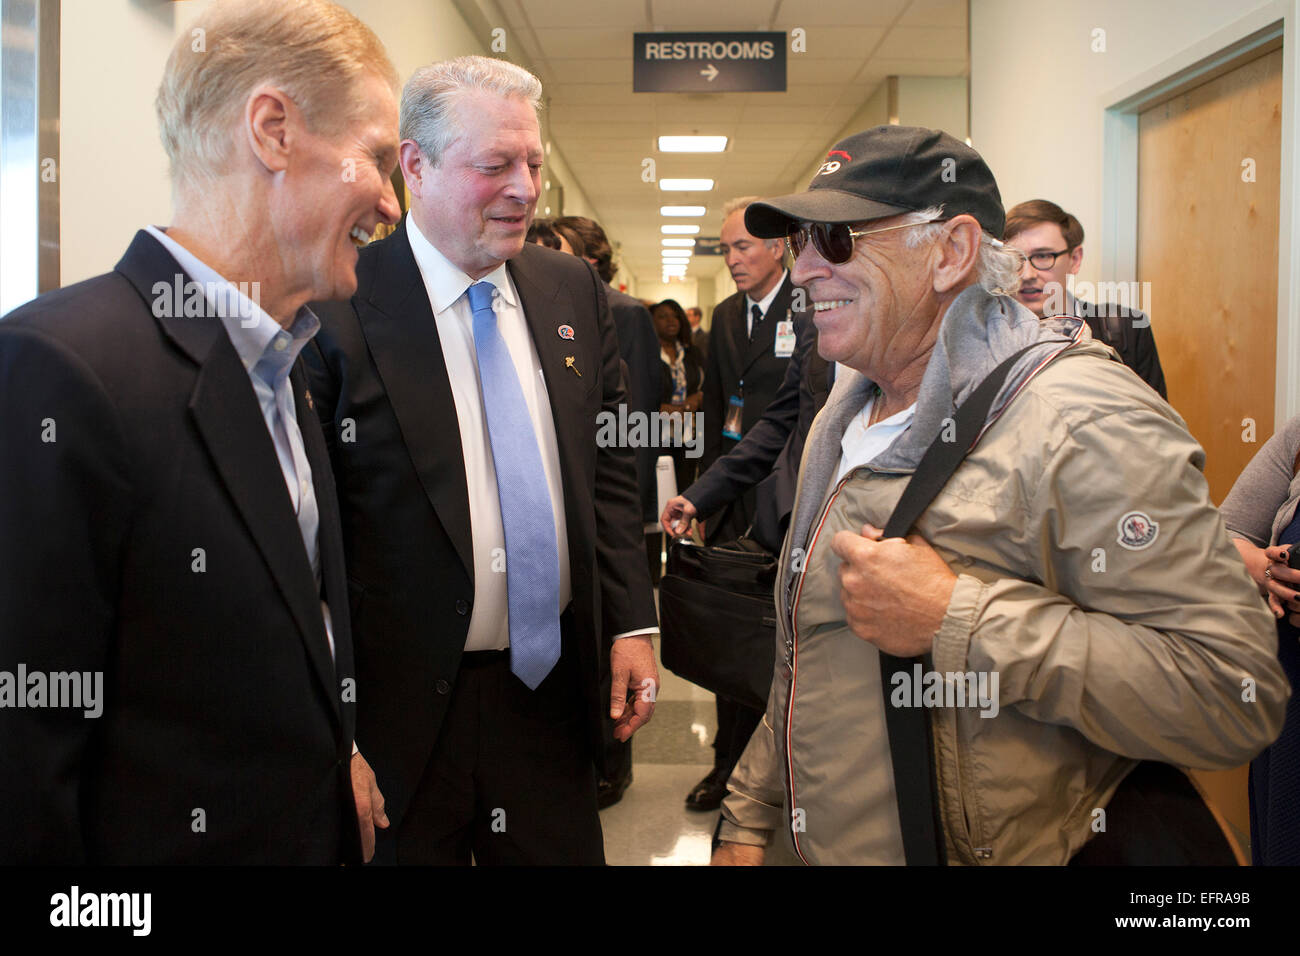 US Senator Bill Nelson, left, and former Vice President Al Gore greet singer Jimmy Buffett, right, the Kennedy Space Center prior to the planned liftoff of NOAA Deep Space Climate Observatory mission, or DSCOVR, aboard a SpaceX Falcon 9 rocket February 8, 2015 in Cape Canaveral, Florida. Stock Photo